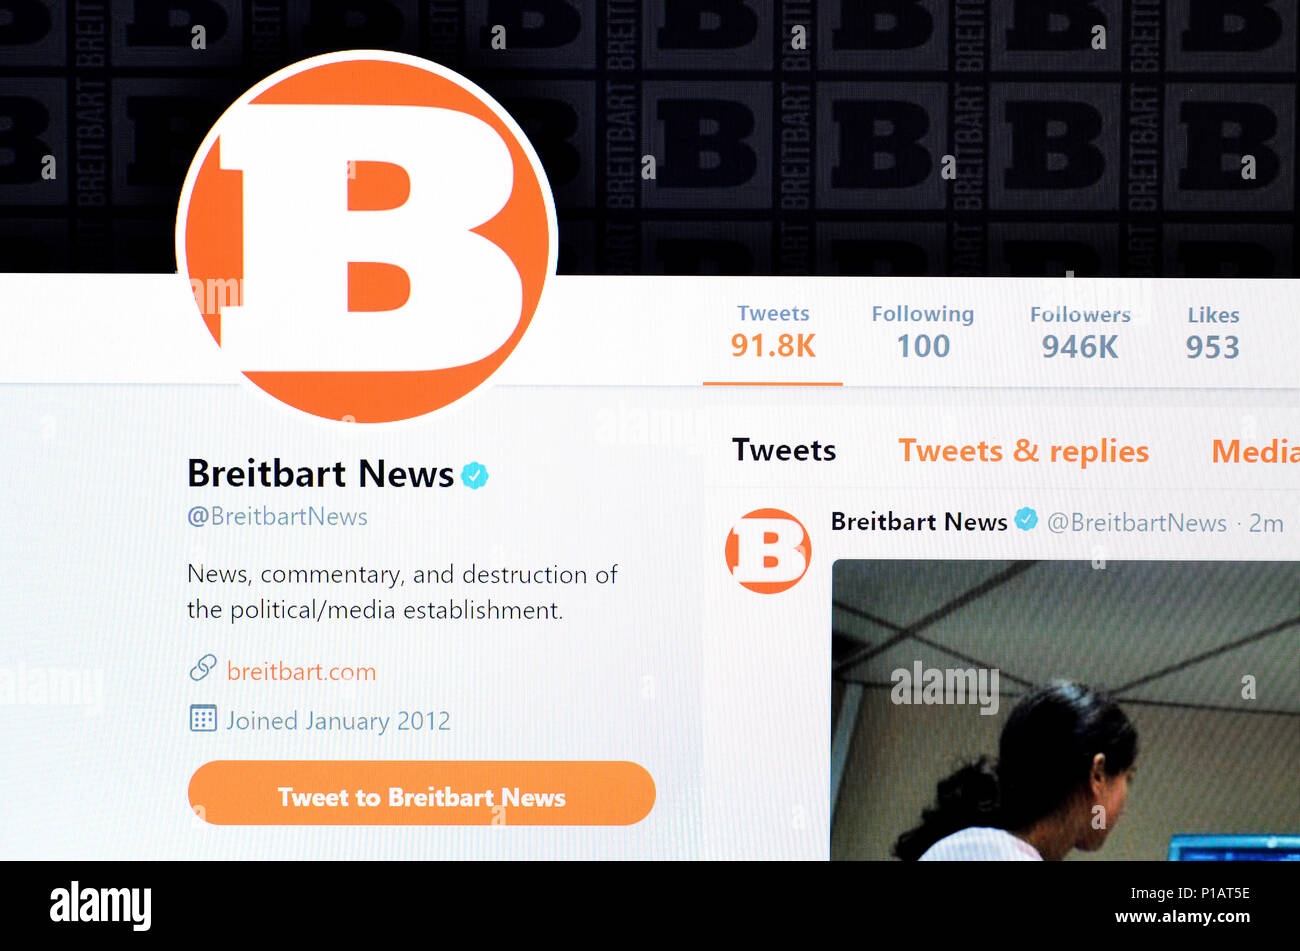 Breitbart News Twitter compte home page (Juin 2018) Banque D'Images